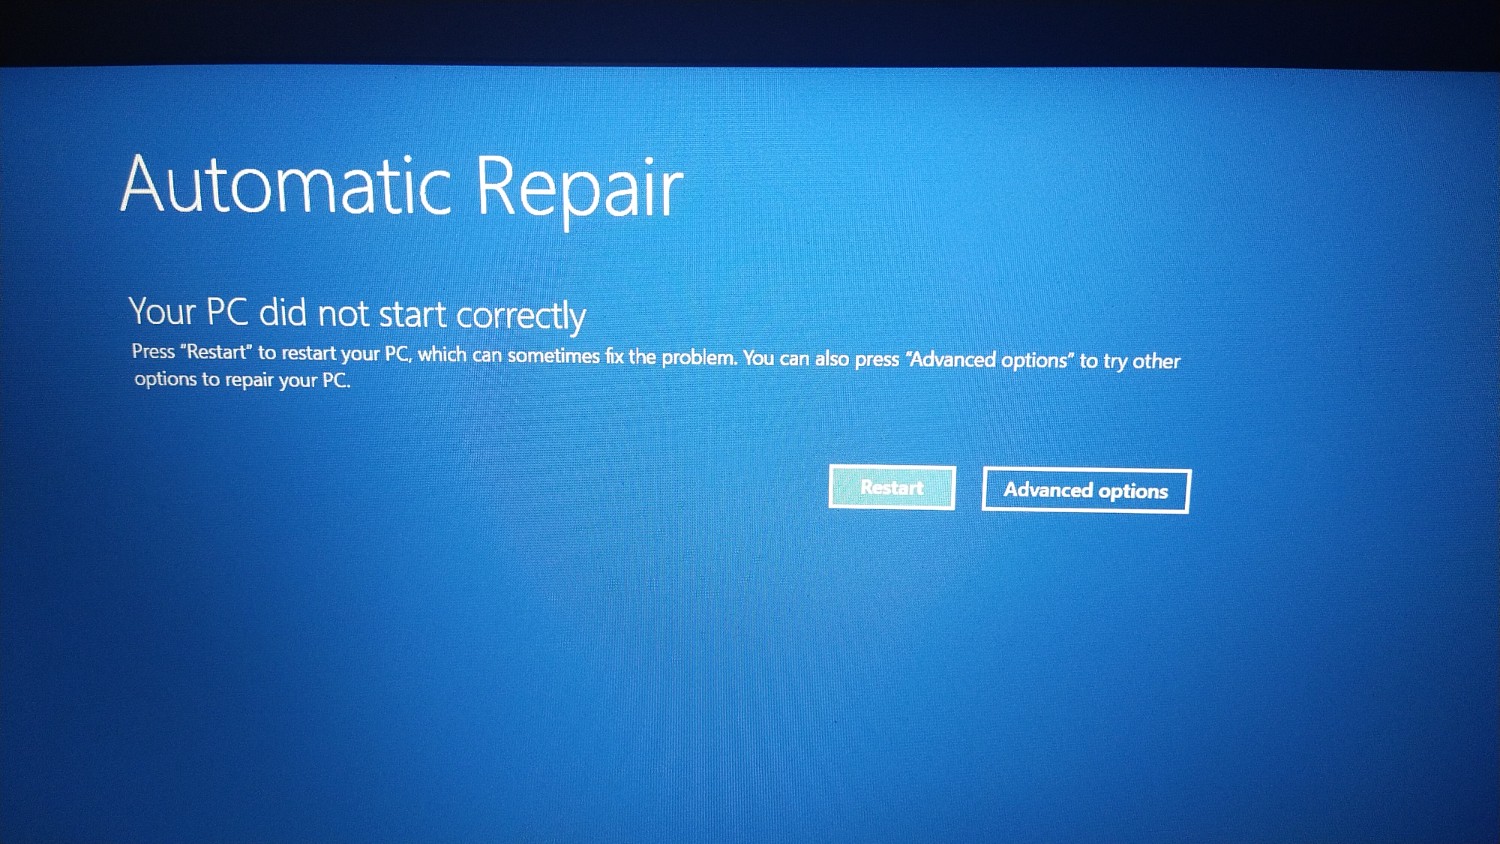 how long does attempting repairs take